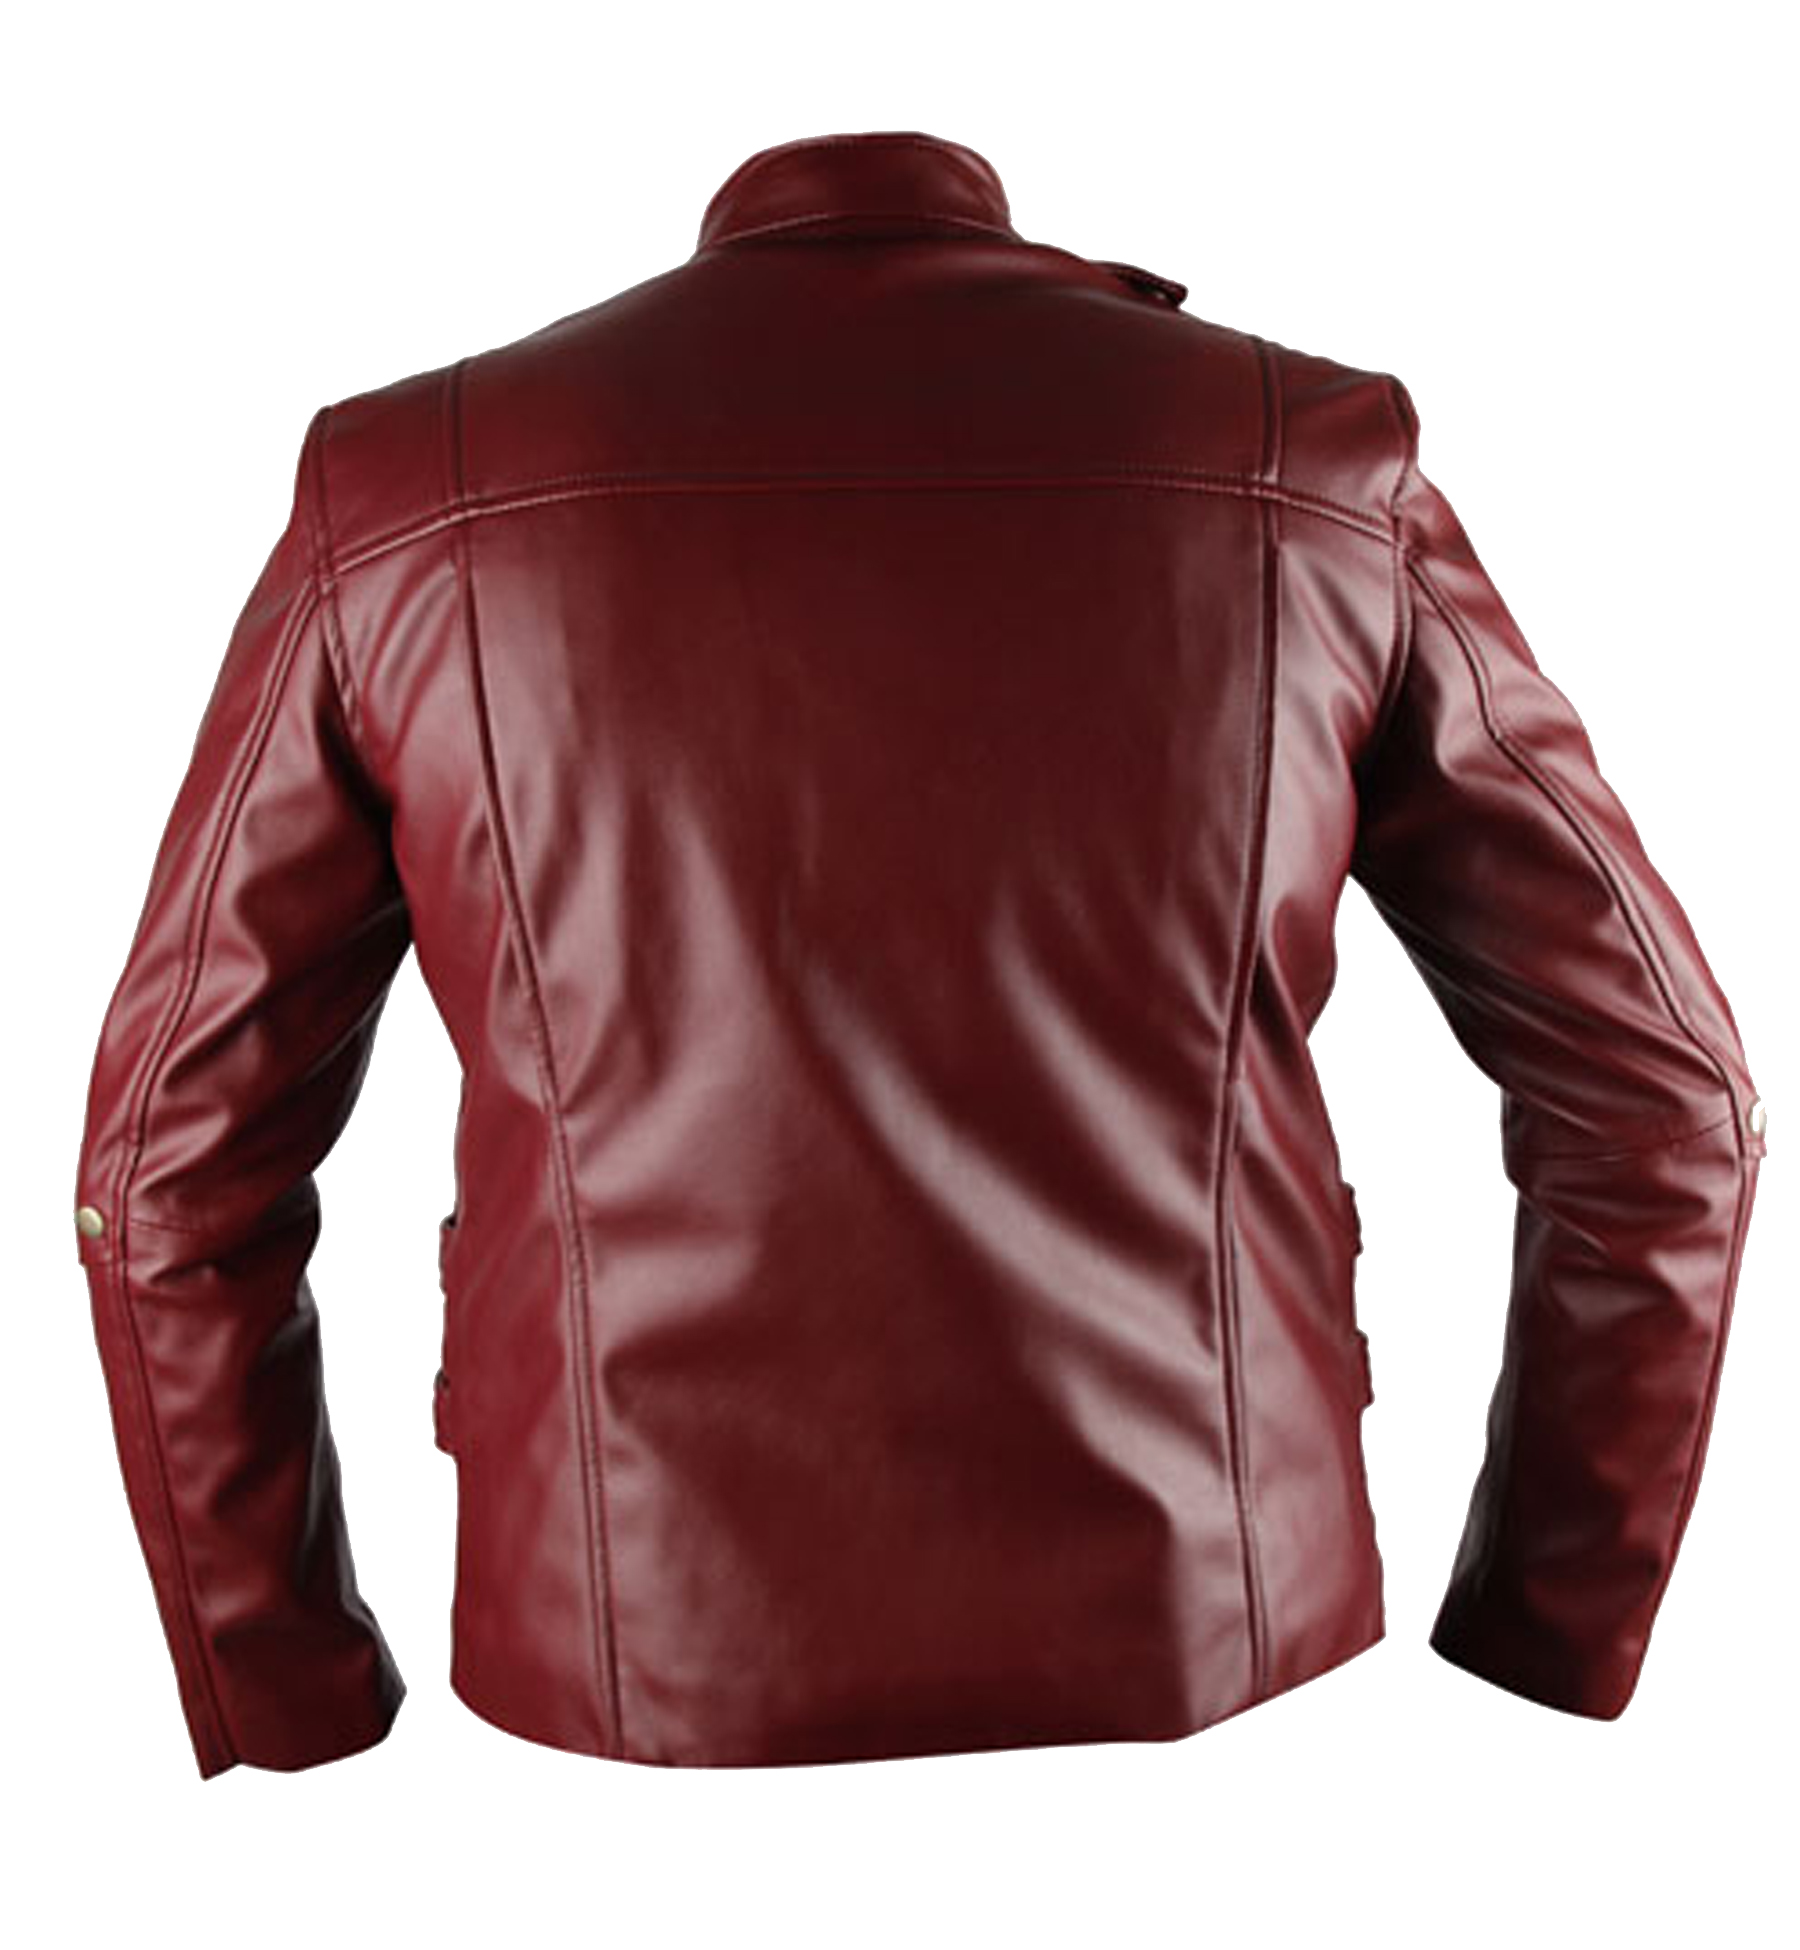 New-Star-Lord-Guardians-Of-The-Galaxy-Leather-Jacket-4-1